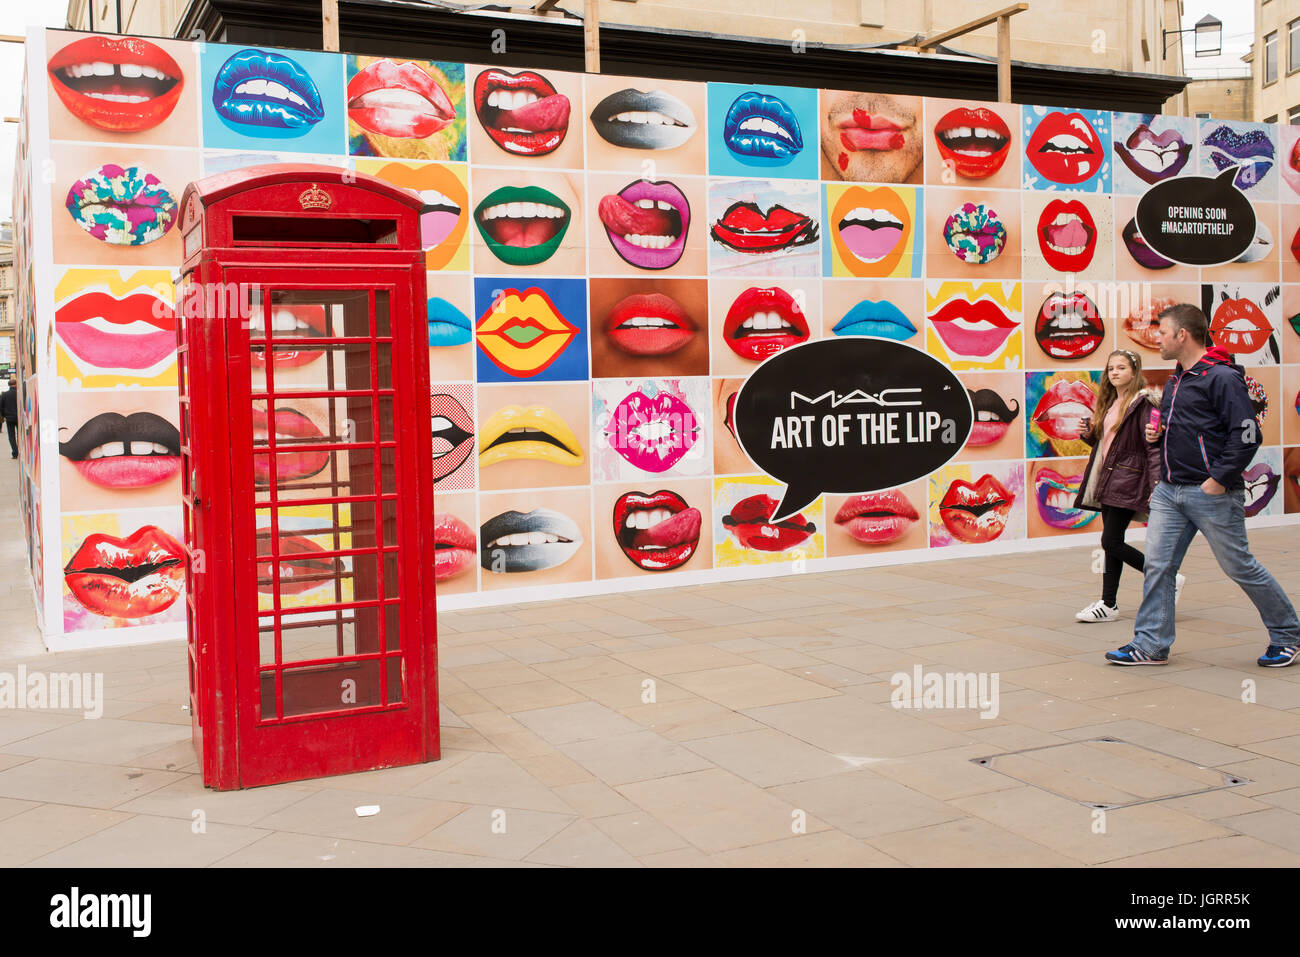 Big billboard on UK high street full of mouths with lipstick next to a red phone booth advertising MAC Cosmetics, stylized as M·A·C, a cosmetics manuf Stock Photo